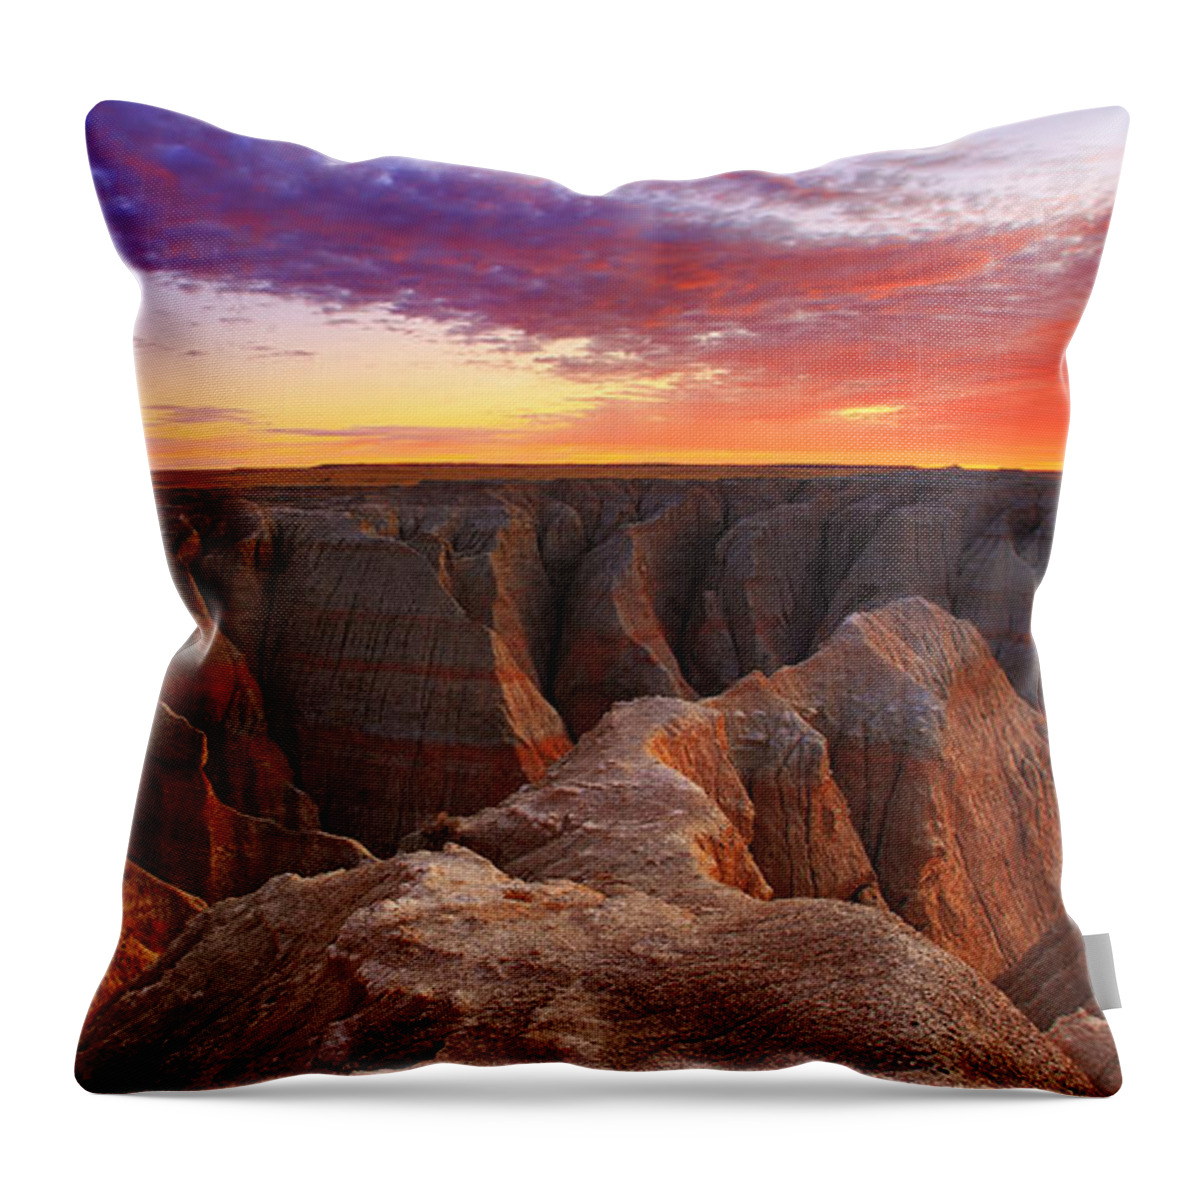 Death Throw Pillow featuring the photograph Lusting Crust 1 by Kadek Susanto